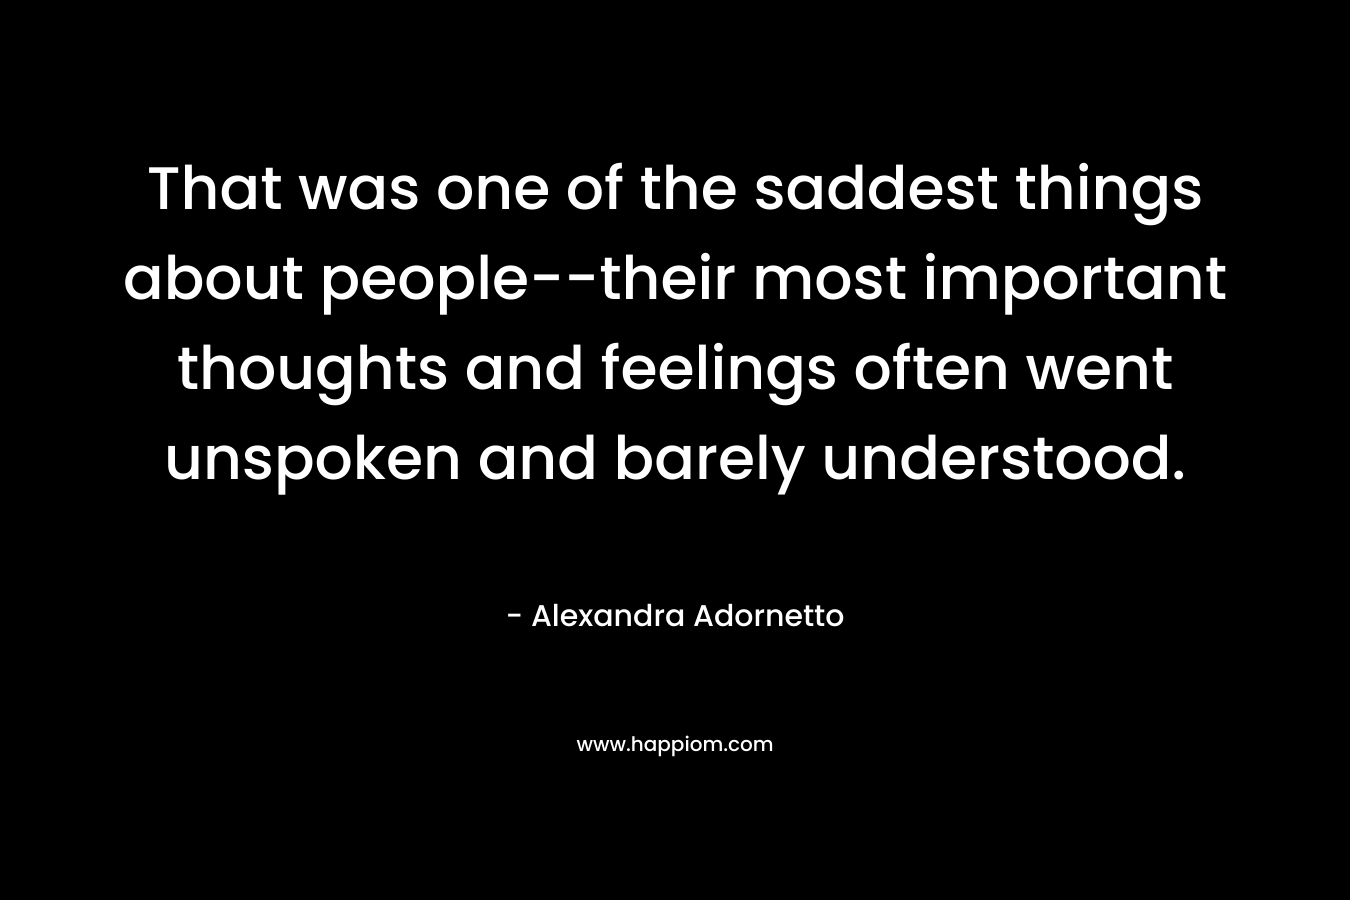 That was one of the saddest things about people--their most important thoughts and feelings often went unspoken and barely understood.